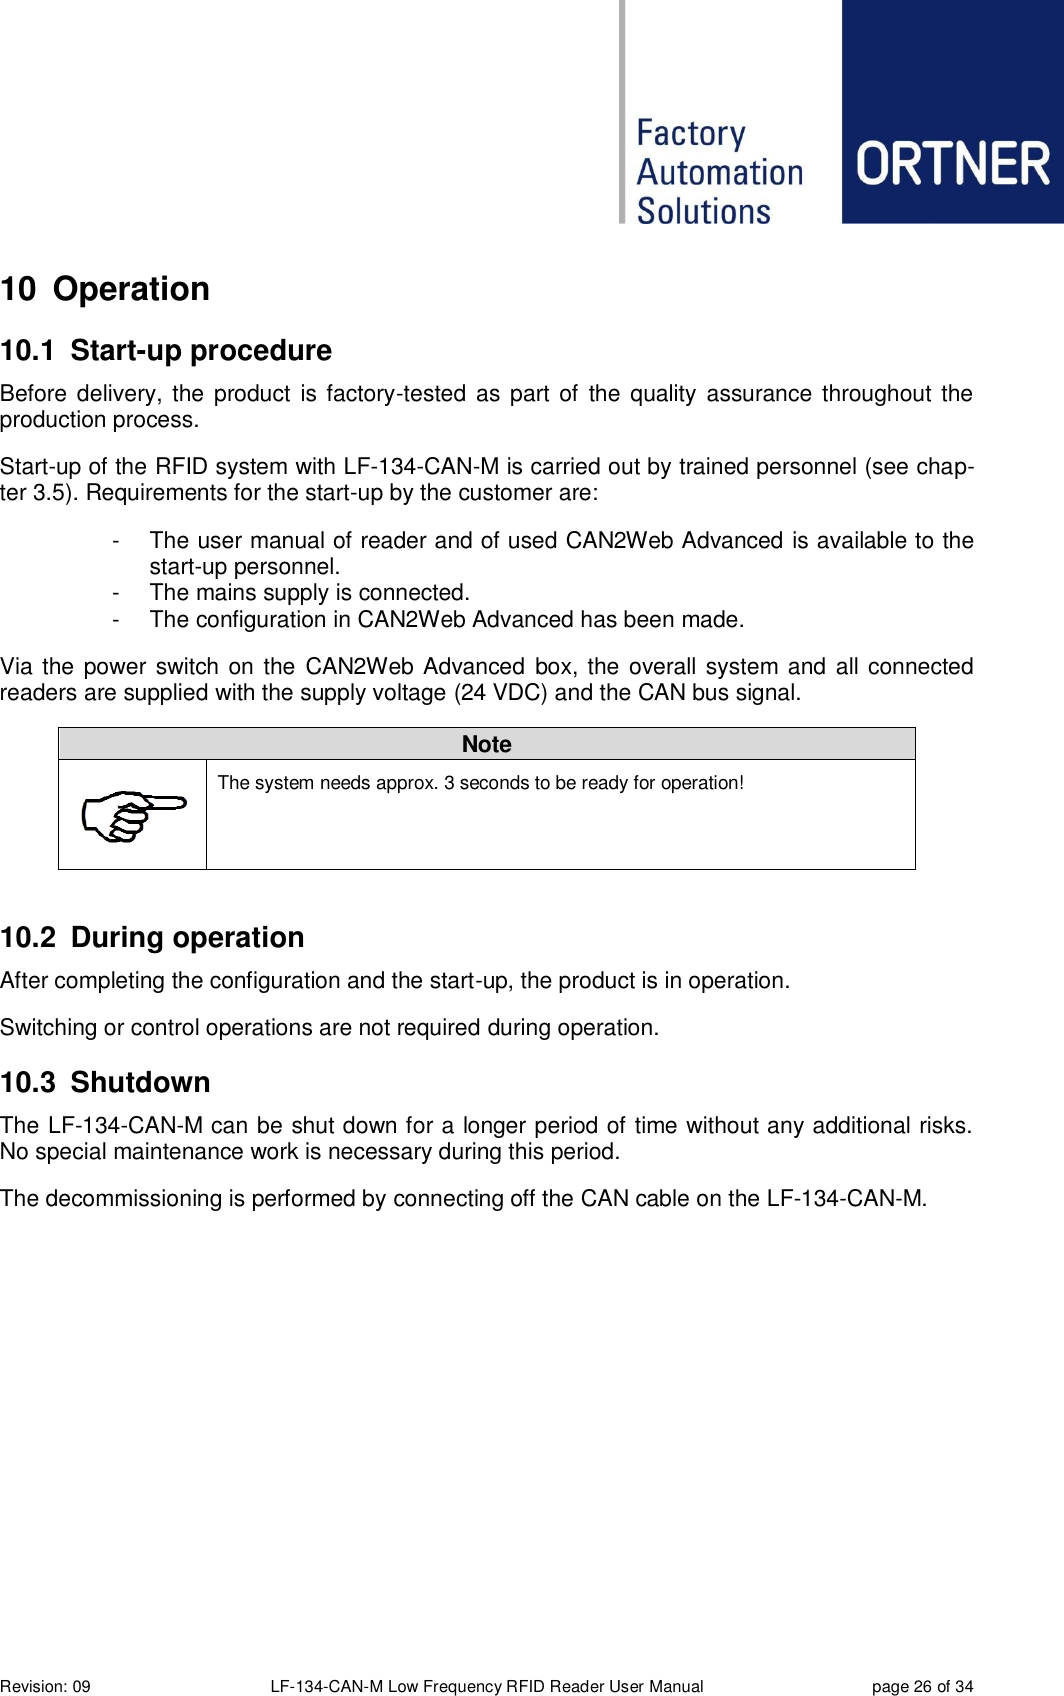  Revision: 09 LF-134-CAN-M Low Frequency RFID Reader User Manual  page 26 of 34 10  Operation 10.1  Start-up procedure Before delivery, the  product  is factory-tested as part of the quality  assurance throughout the production process.  Start-up of the RFID system with LF-134-CAN-M is carried out by trained personnel (see chap-ter 3.5). Requirements for the start-up by the customer are: -  The user manual of reader and of used CAN2Web Advanced is available to the start-up personnel. -  The mains supply is connected. -  The configuration in CAN2Web Advanced has been made. Via the power switch on the  CAN2Web Advanced box, the overall system and all connected readers are supplied with the supply voltage (24 VDC) and the CAN bus signal. Note  The system needs approx. 3 seconds to be ready for operation!   10.2  During operation After completing the configuration and the start-up, the product is in operation. Switching or control operations are not required during operation. 10.3  Shutdown The LF-134-CAN-M can be shut down for a longer period of time without any additional risks. No special maintenance work is necessary during this period. The decommissioning is performed by connecting off the CAN cable on the LF-134-CAN-M. 